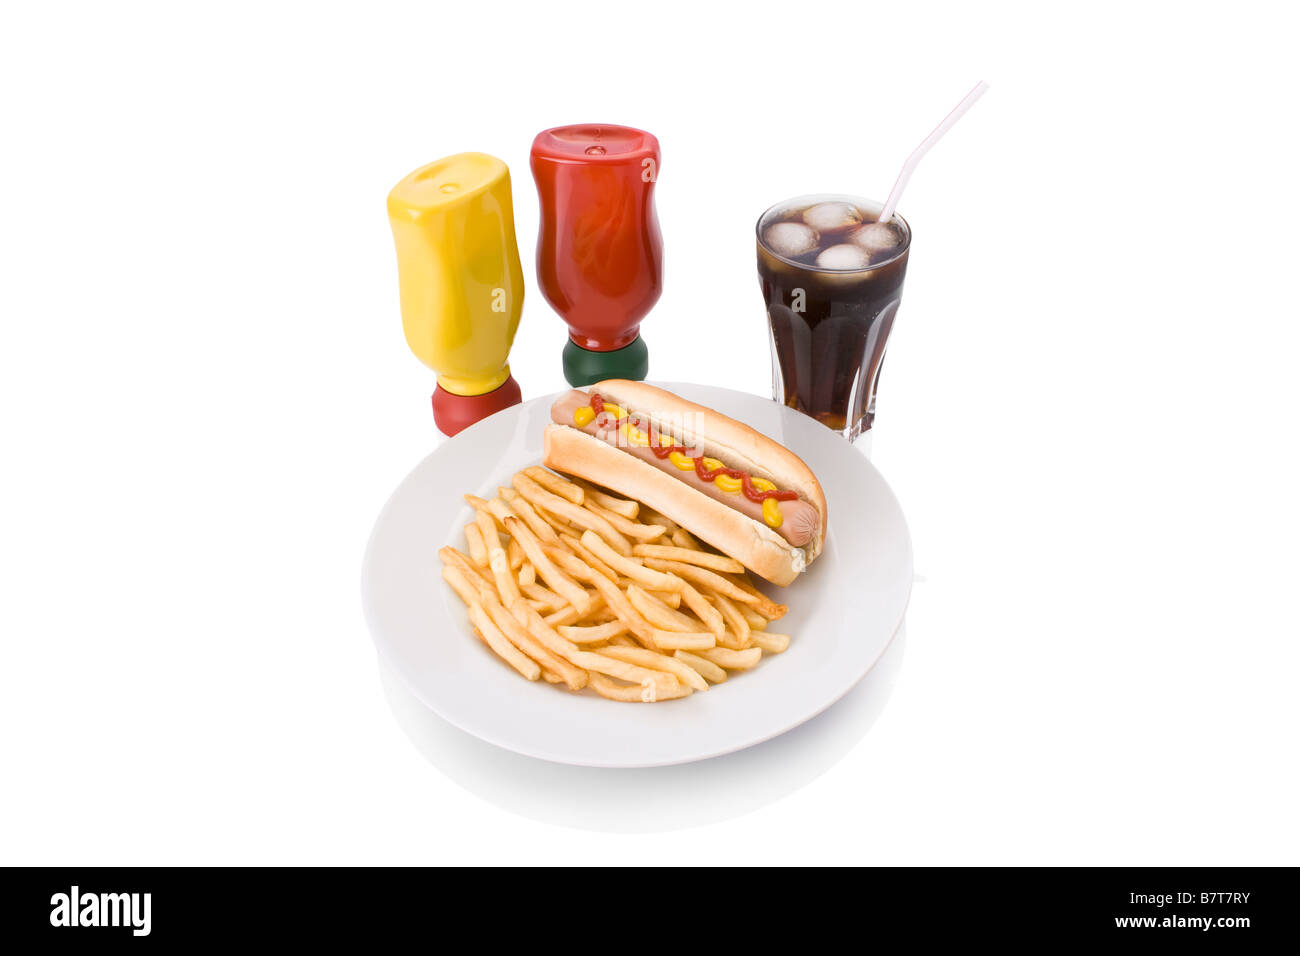 Fast food meal with Hotdog, French fries and a Cola in a dish Stock Photo